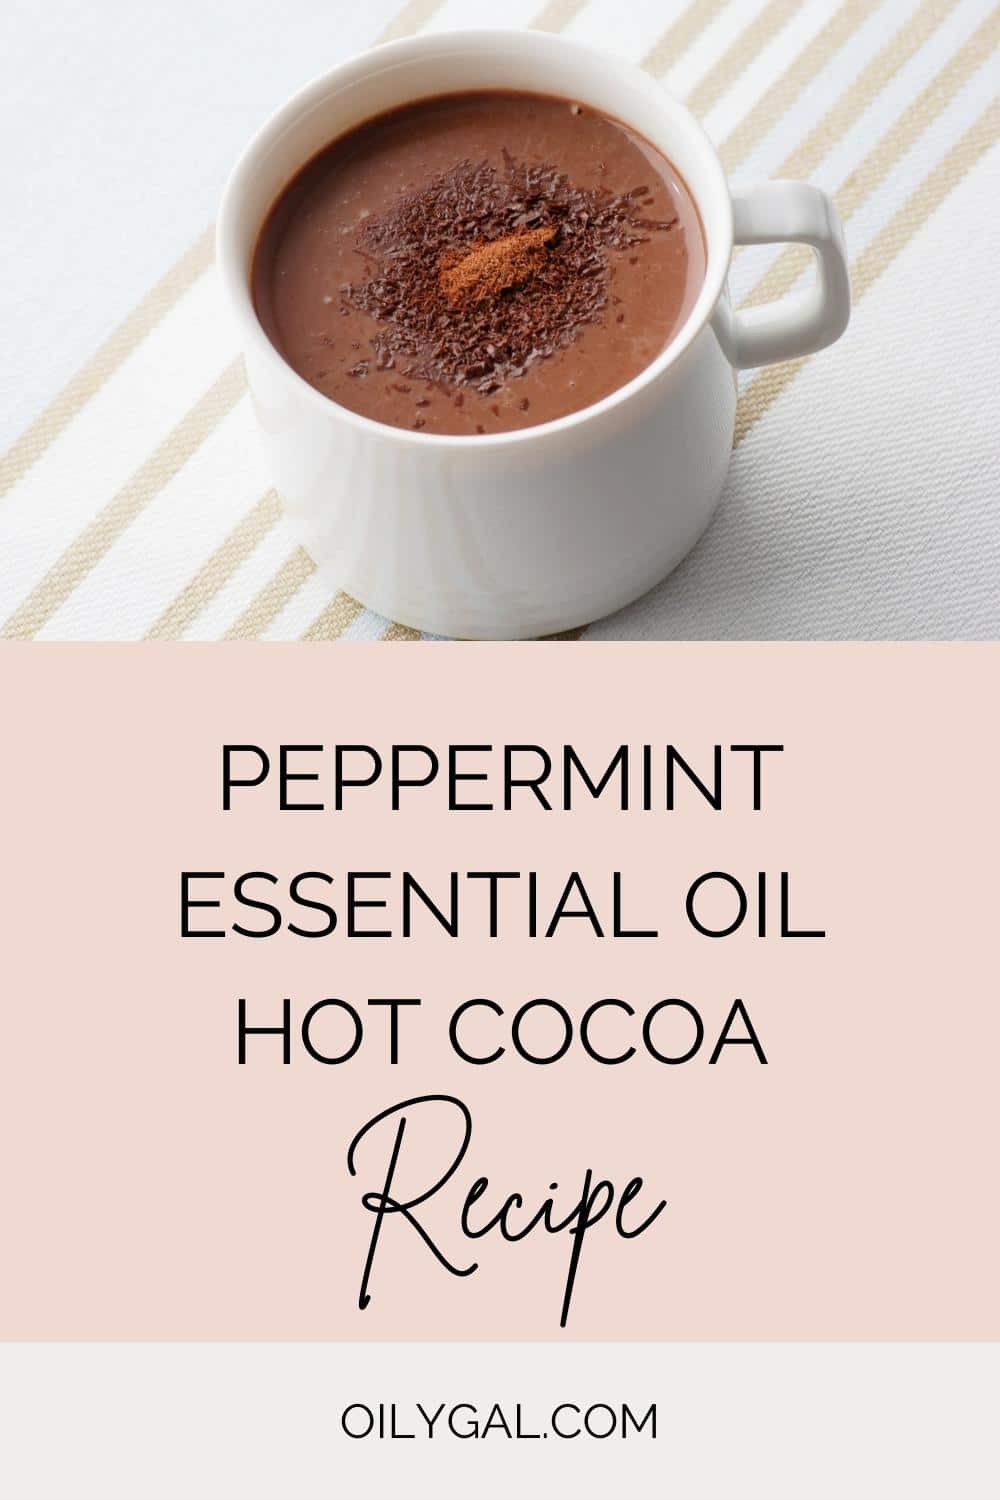 Peppermint Essential Oil Hot Cocoa